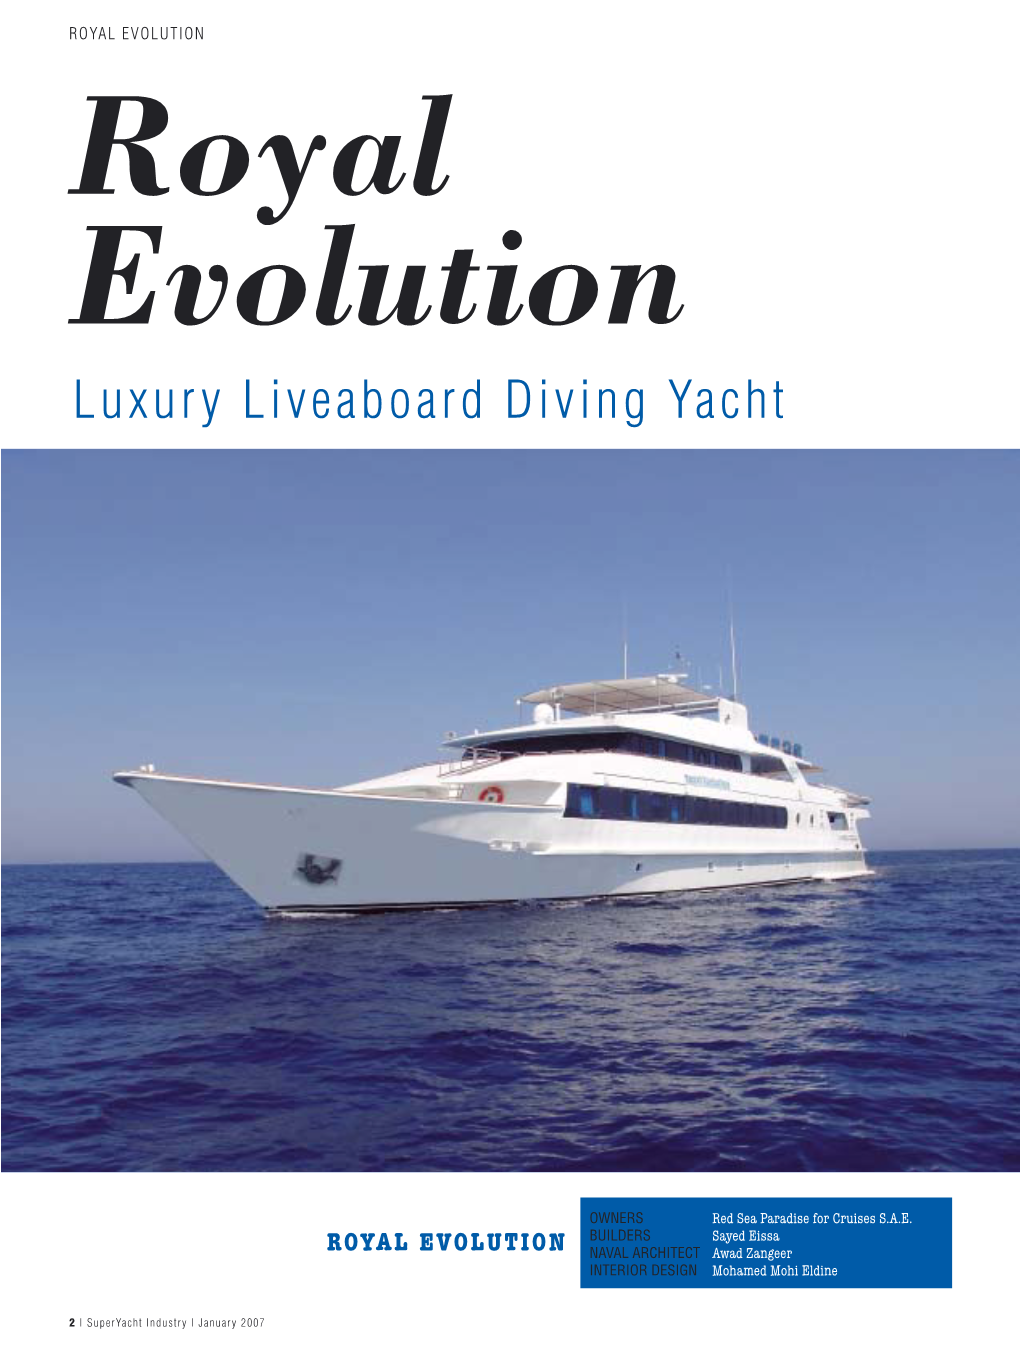 Luxury Liveaboard Diving Yacht